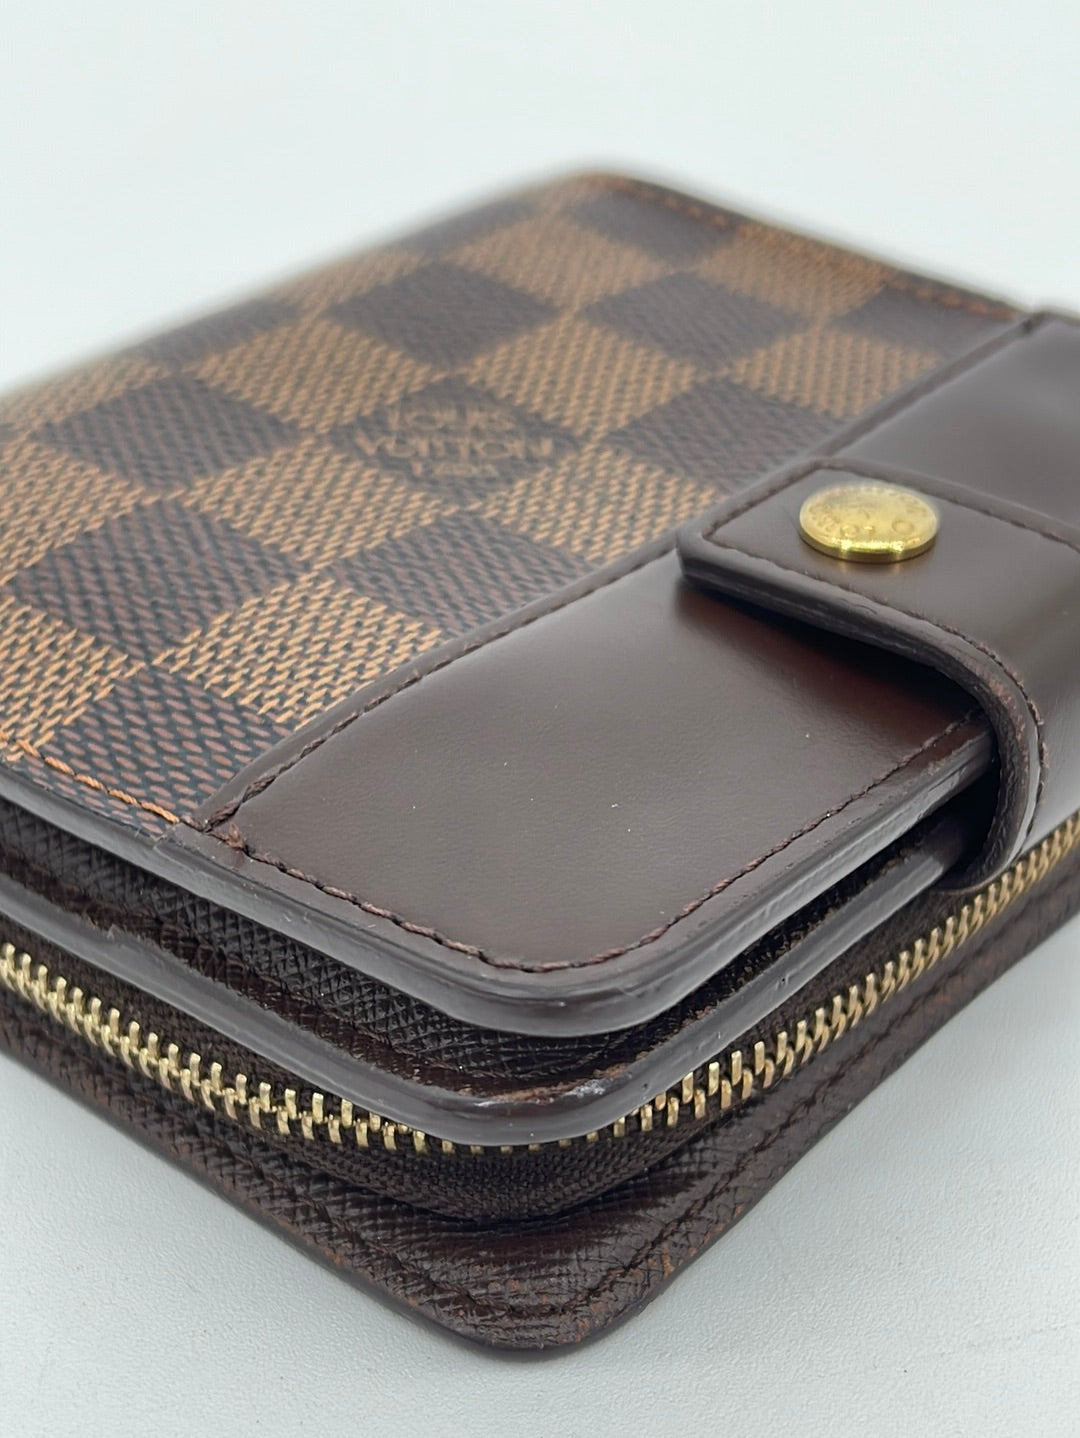 ❌Sold!❌Preowned LV wallet.